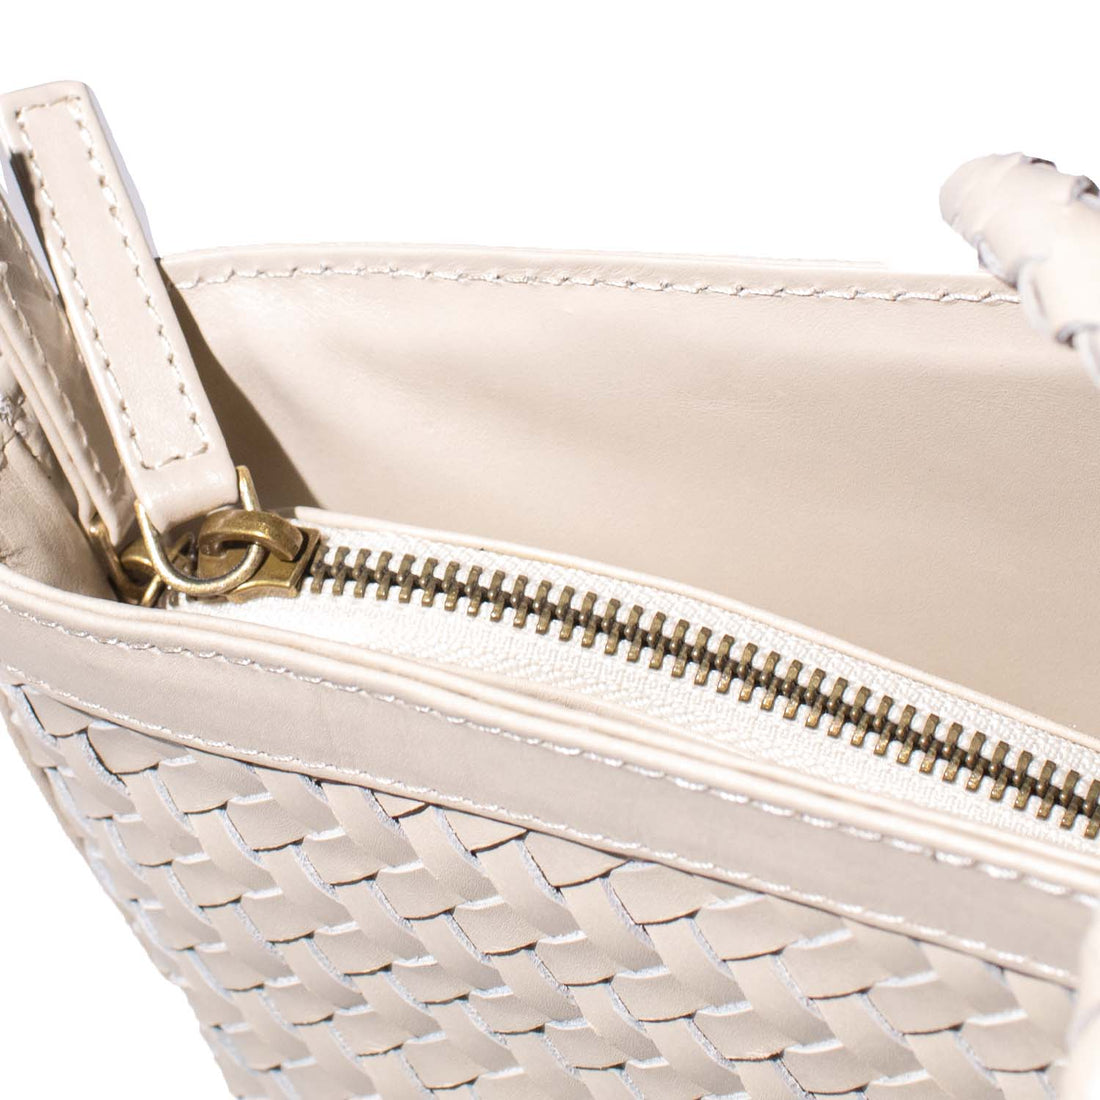 Bembien Marcia Leather Tote in Cream